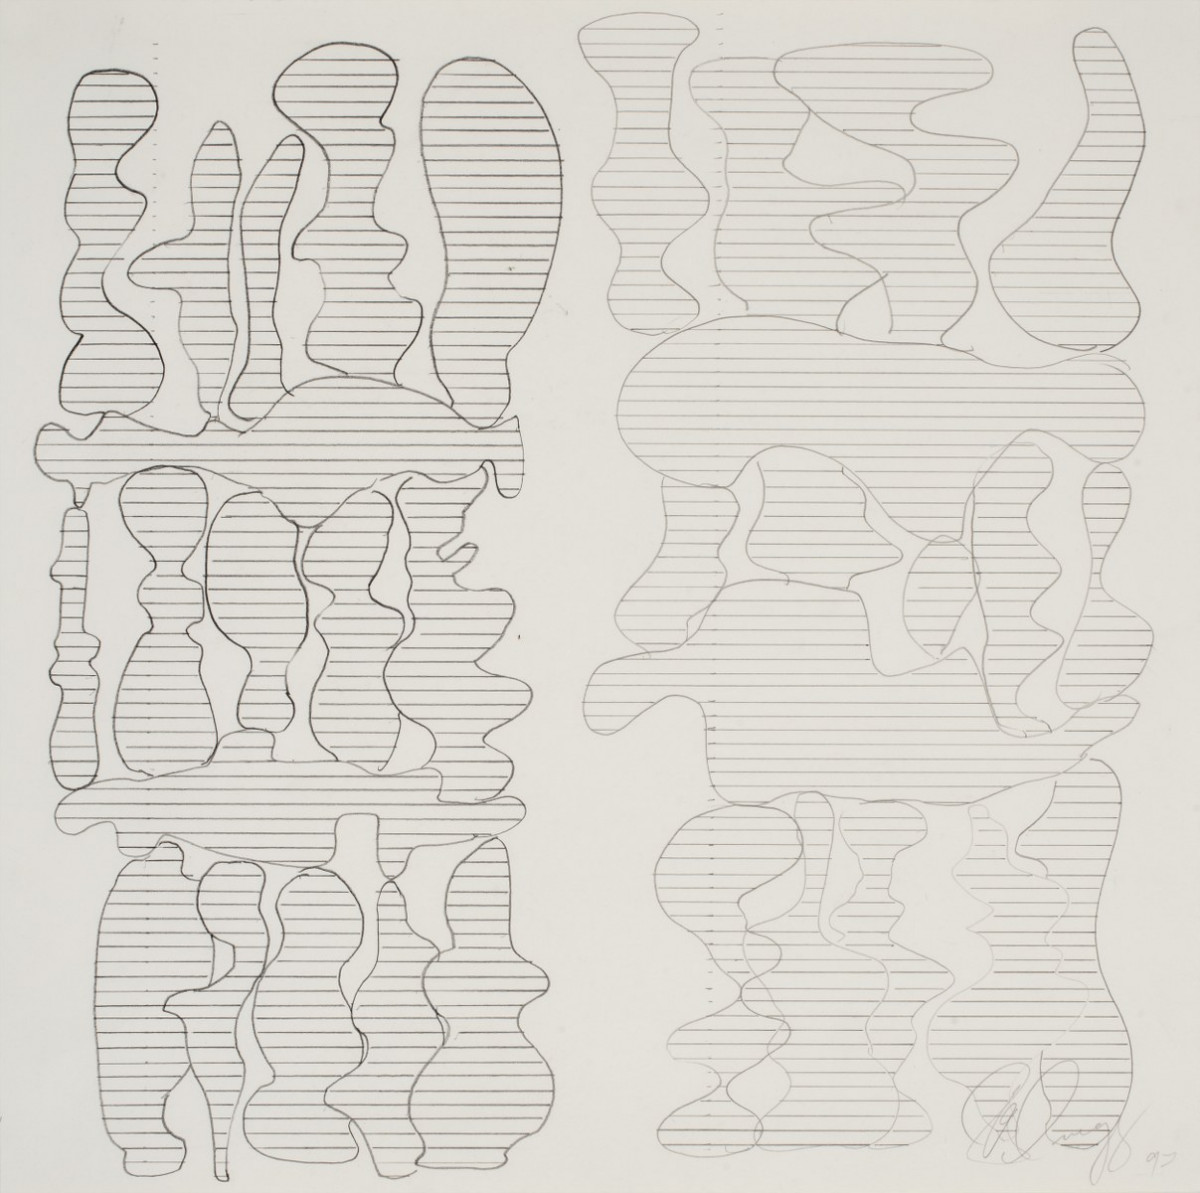 Tony Cragg, ‘Untitled, Nr.1578’, 1997, pencil on paper 